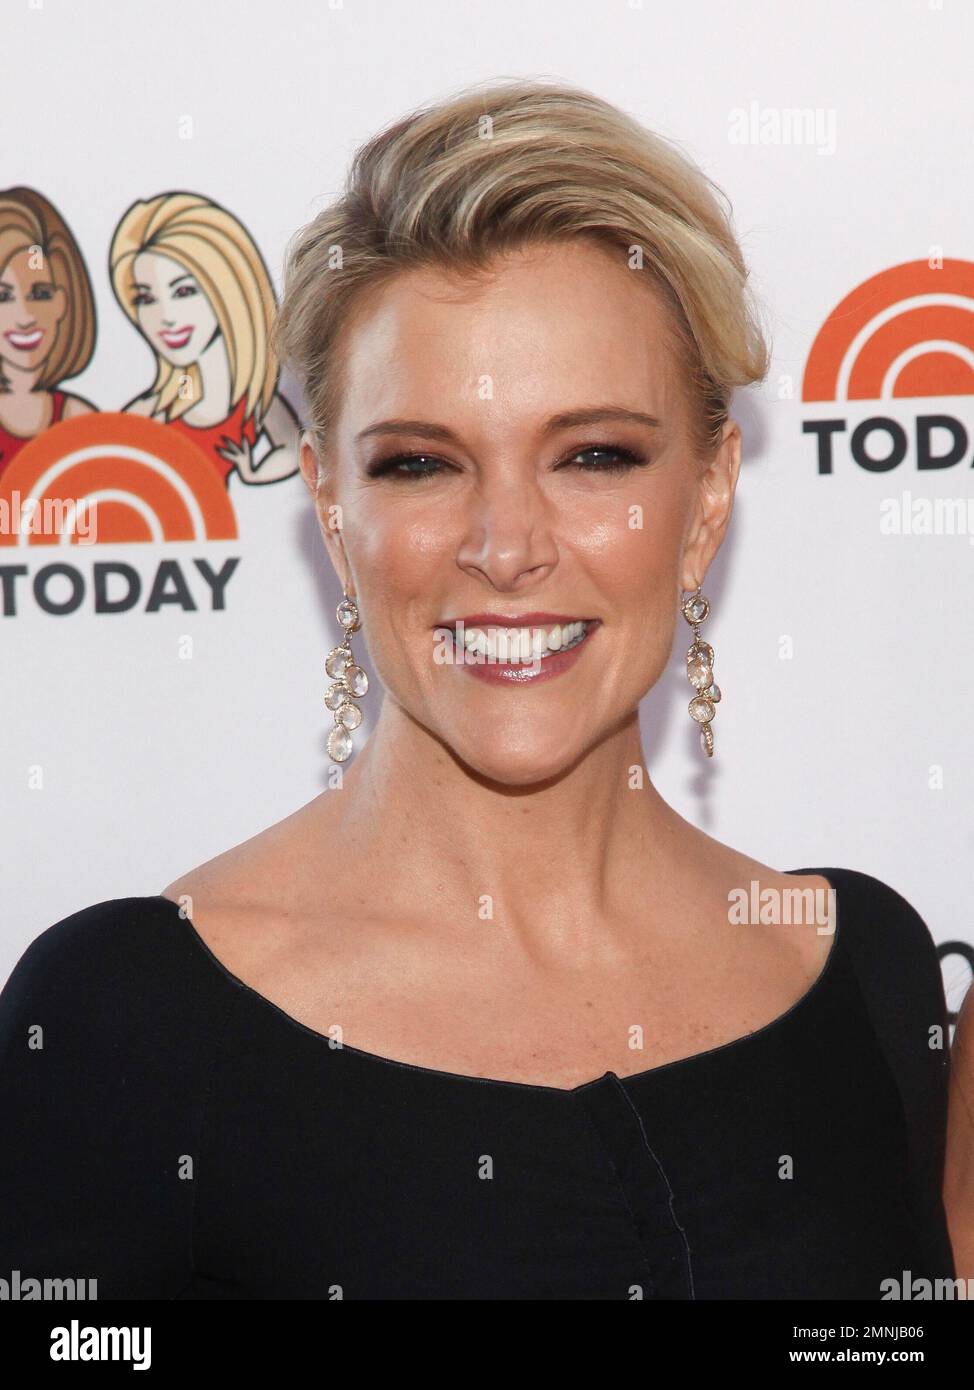 Megyn Kelly attends the "Kathie Lee & Hoda" tenth anniversary party at the Rainbow Room on Wednesday, April 4, 2018, in New York. (Photo by Andy Kropa/Invision/AP) Stock Photo